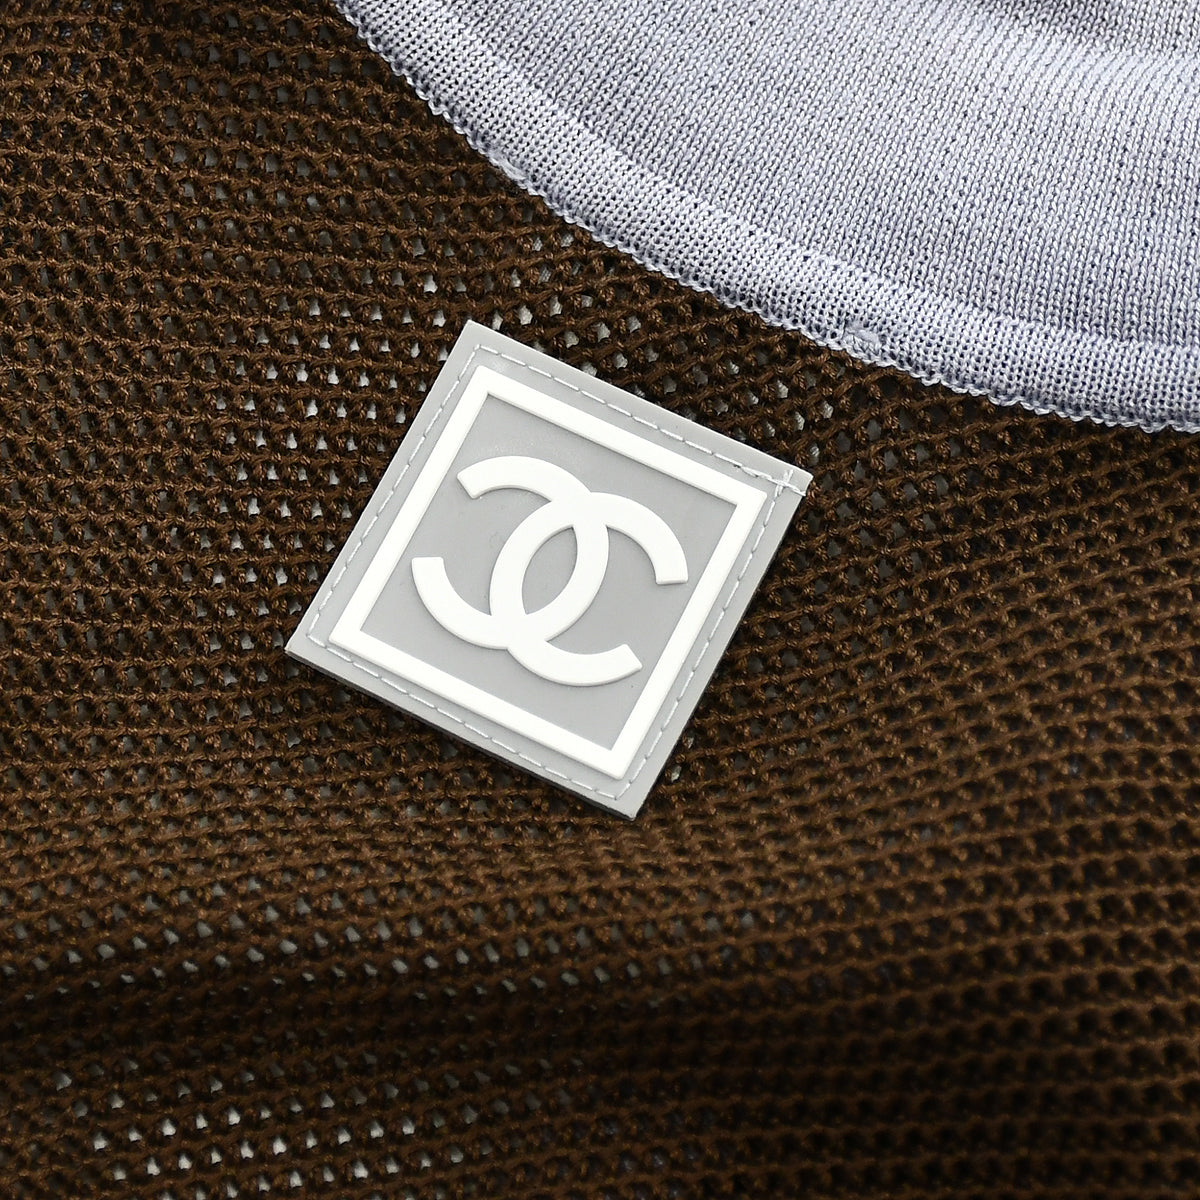 Chanel 2003 spring Sport Line open-knit top 